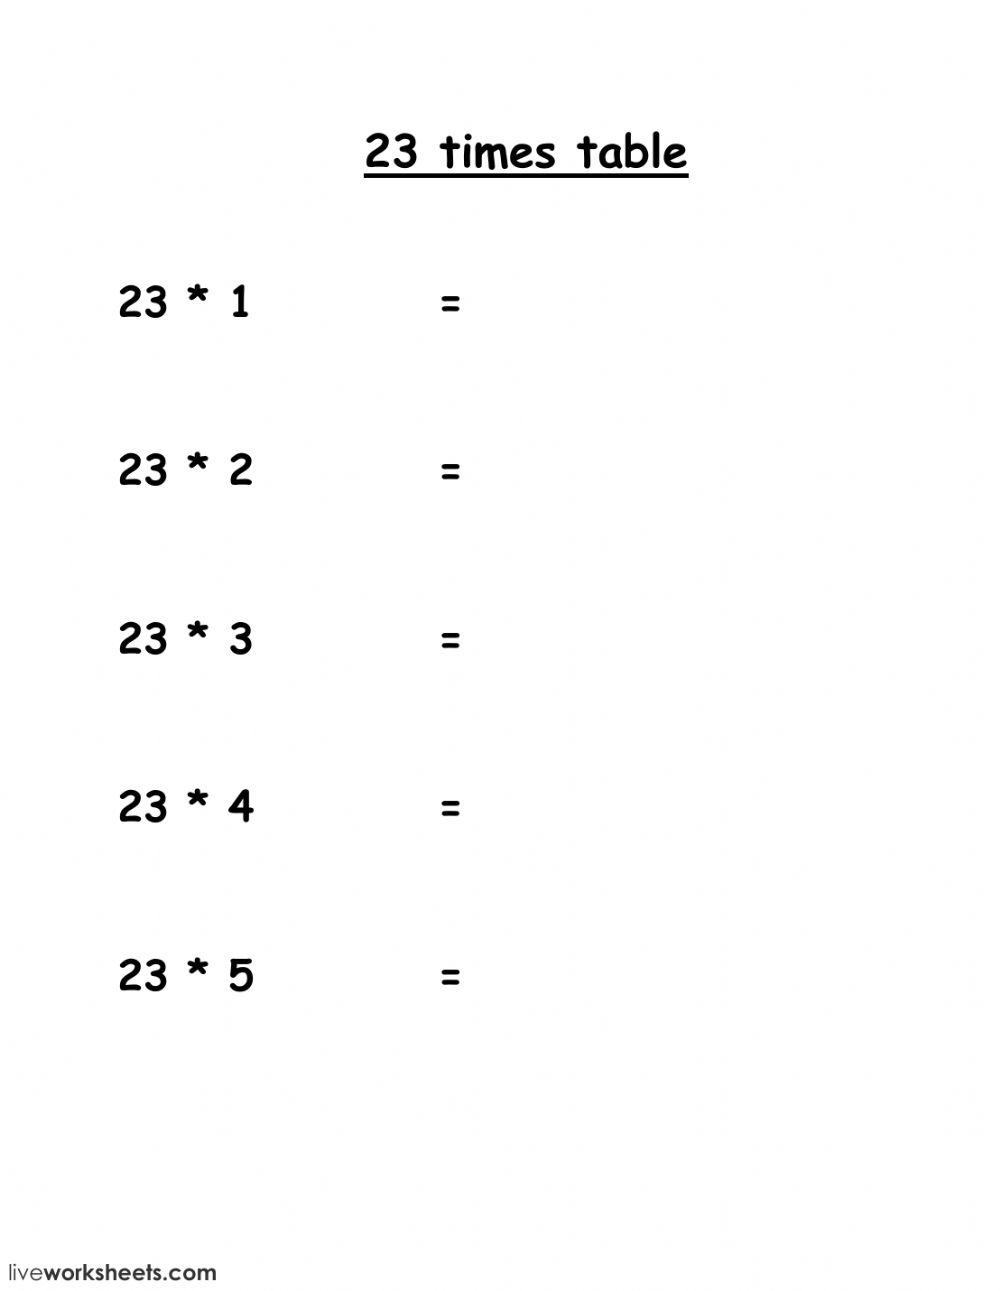 23 times table